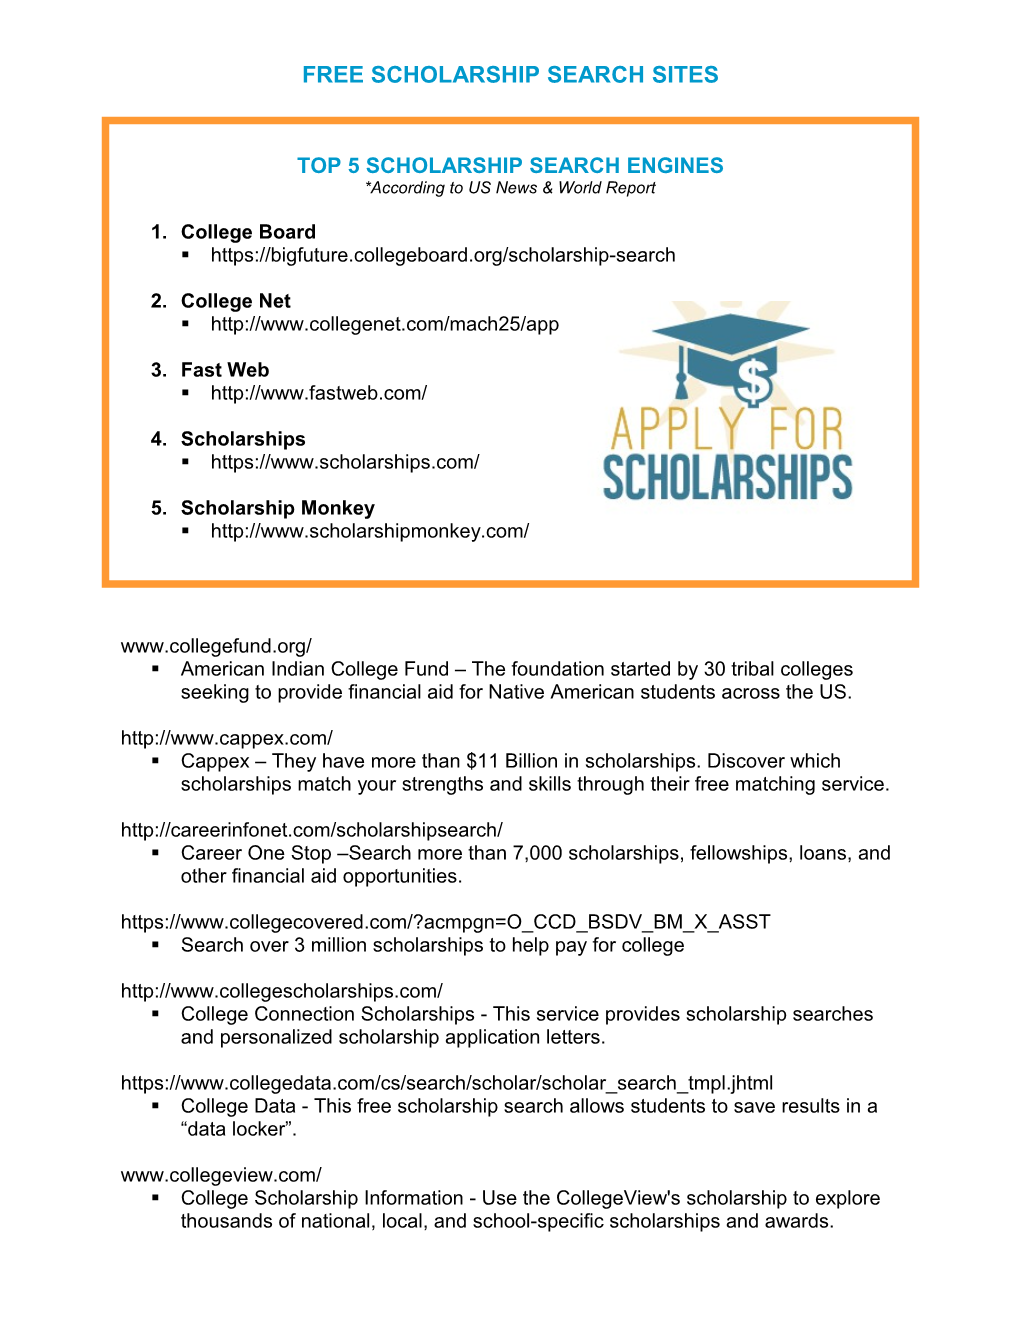 Free Scholarship Searches on The